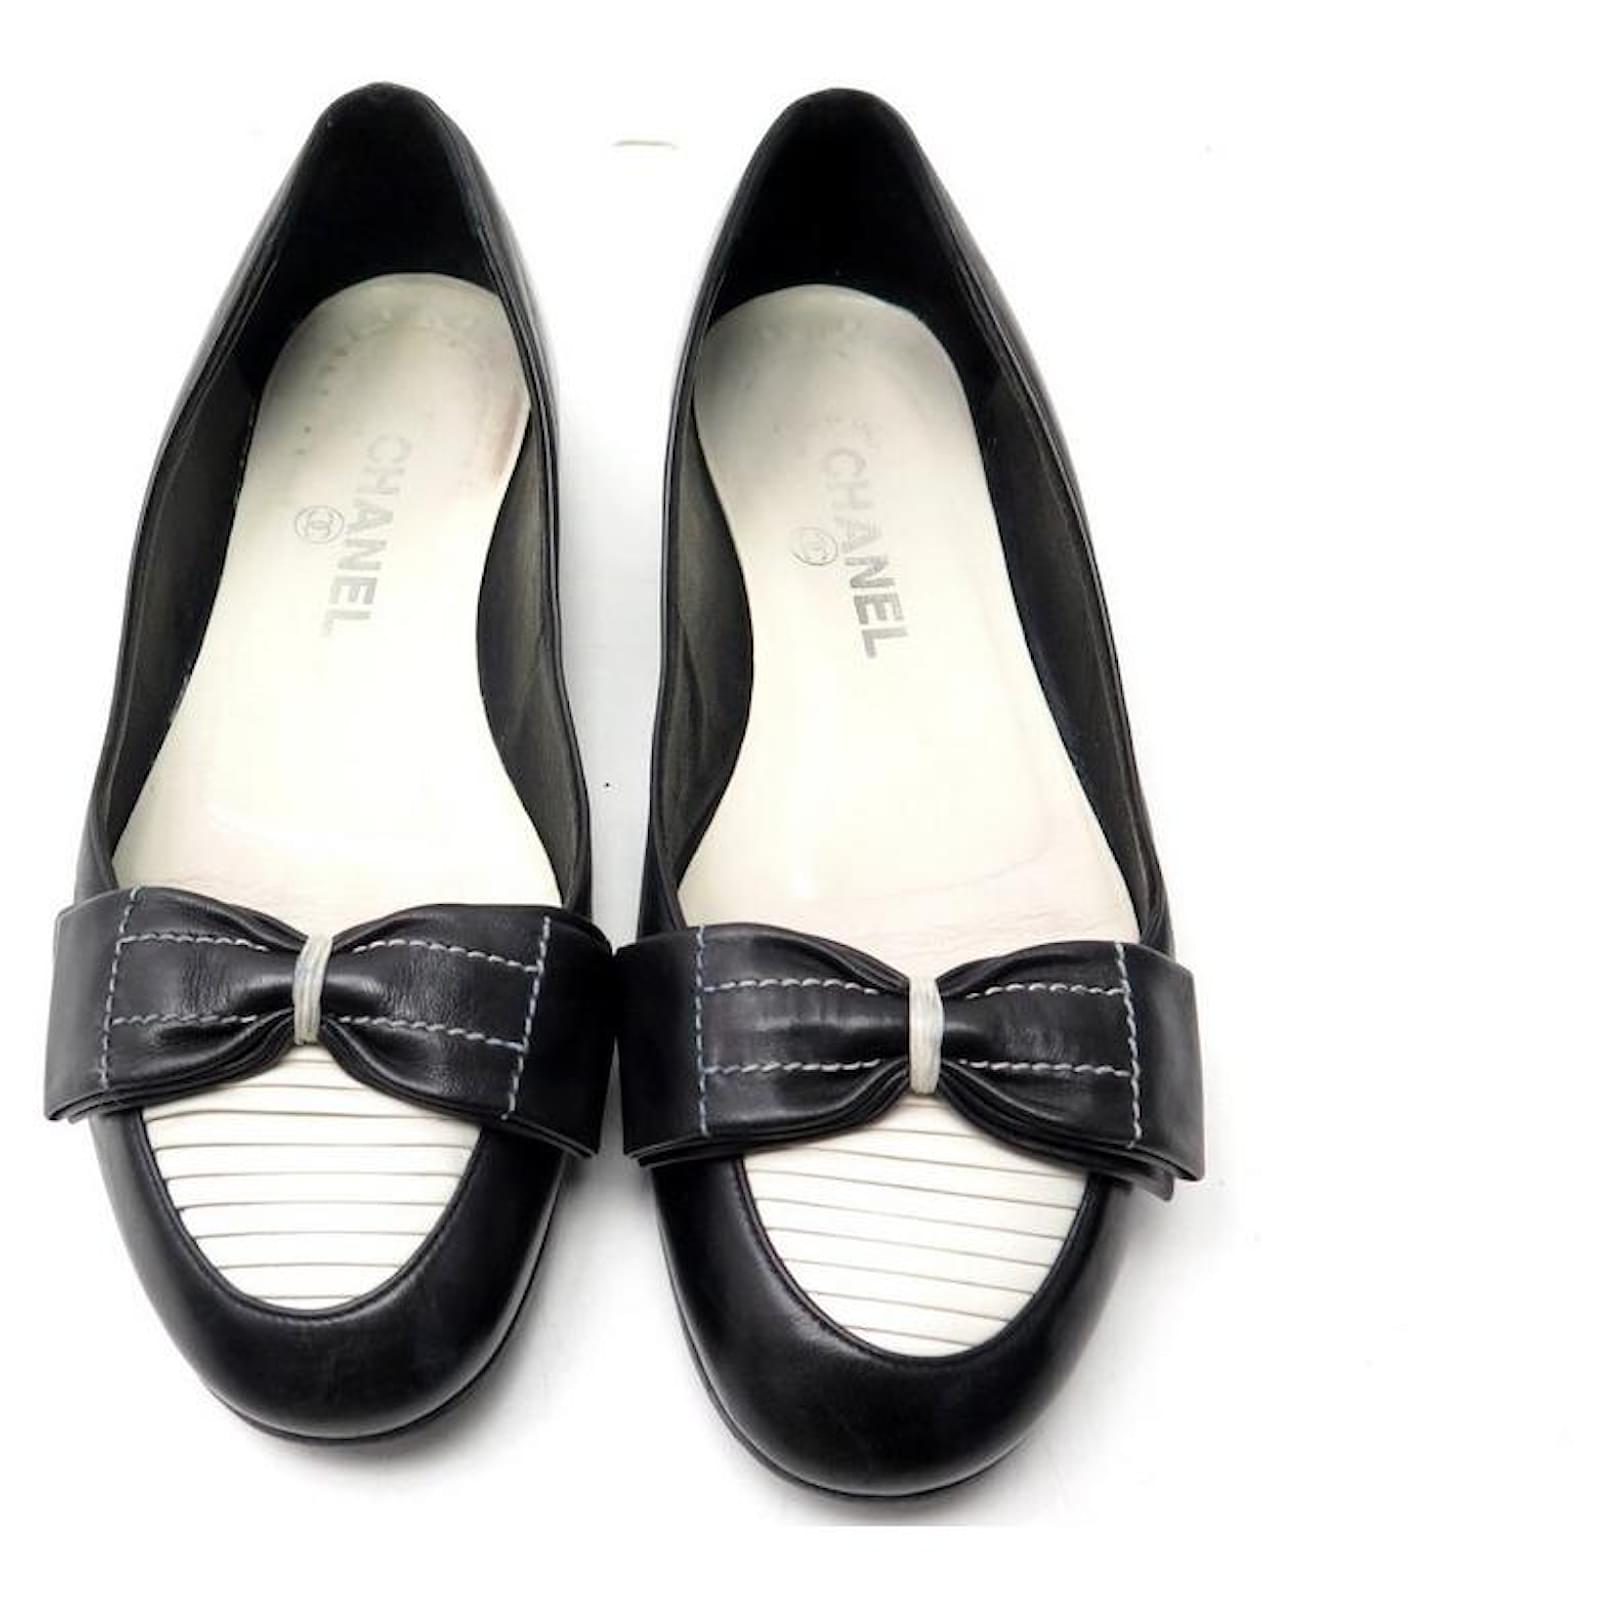 CHANEL BALLERINAS BOW SHOES 38 BLACK & WHITE LEATHER LOAFFERS